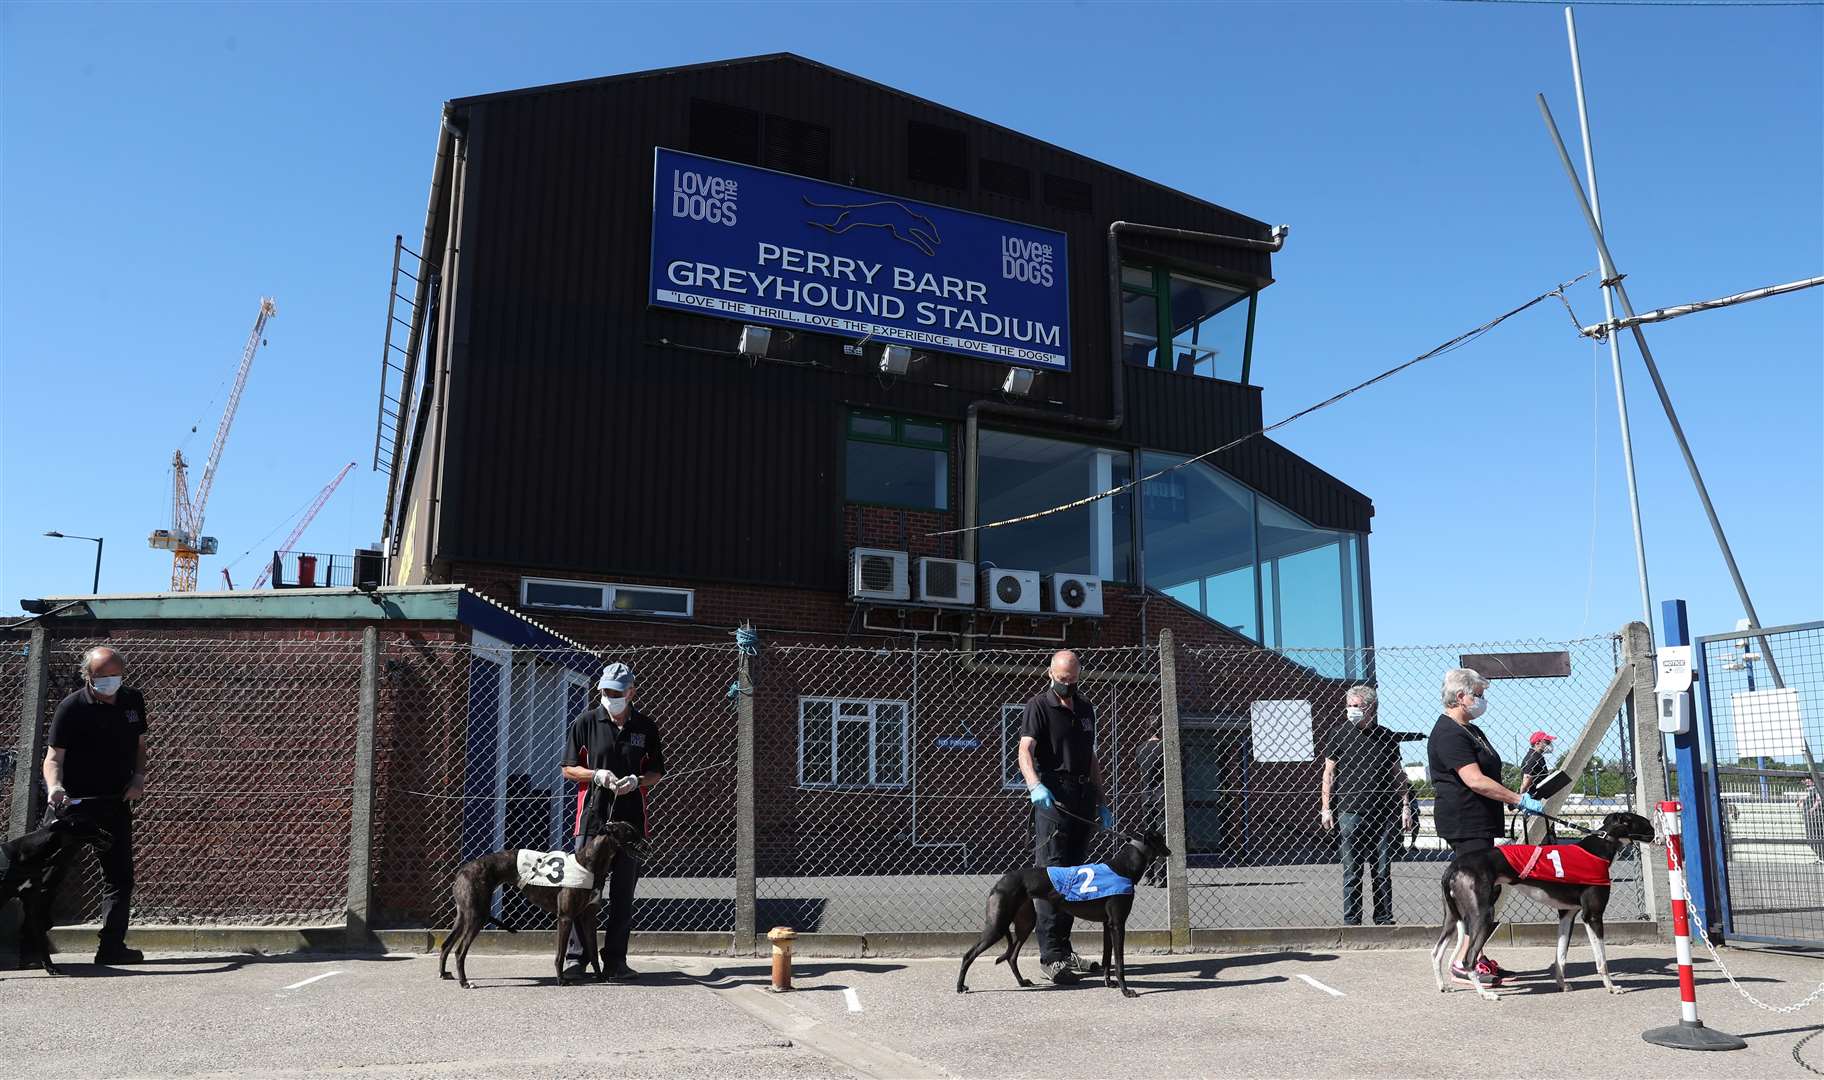 Greyhounds line up to go out for the first race at Perry Barr Greyhound Stadium (David Davies/PA)